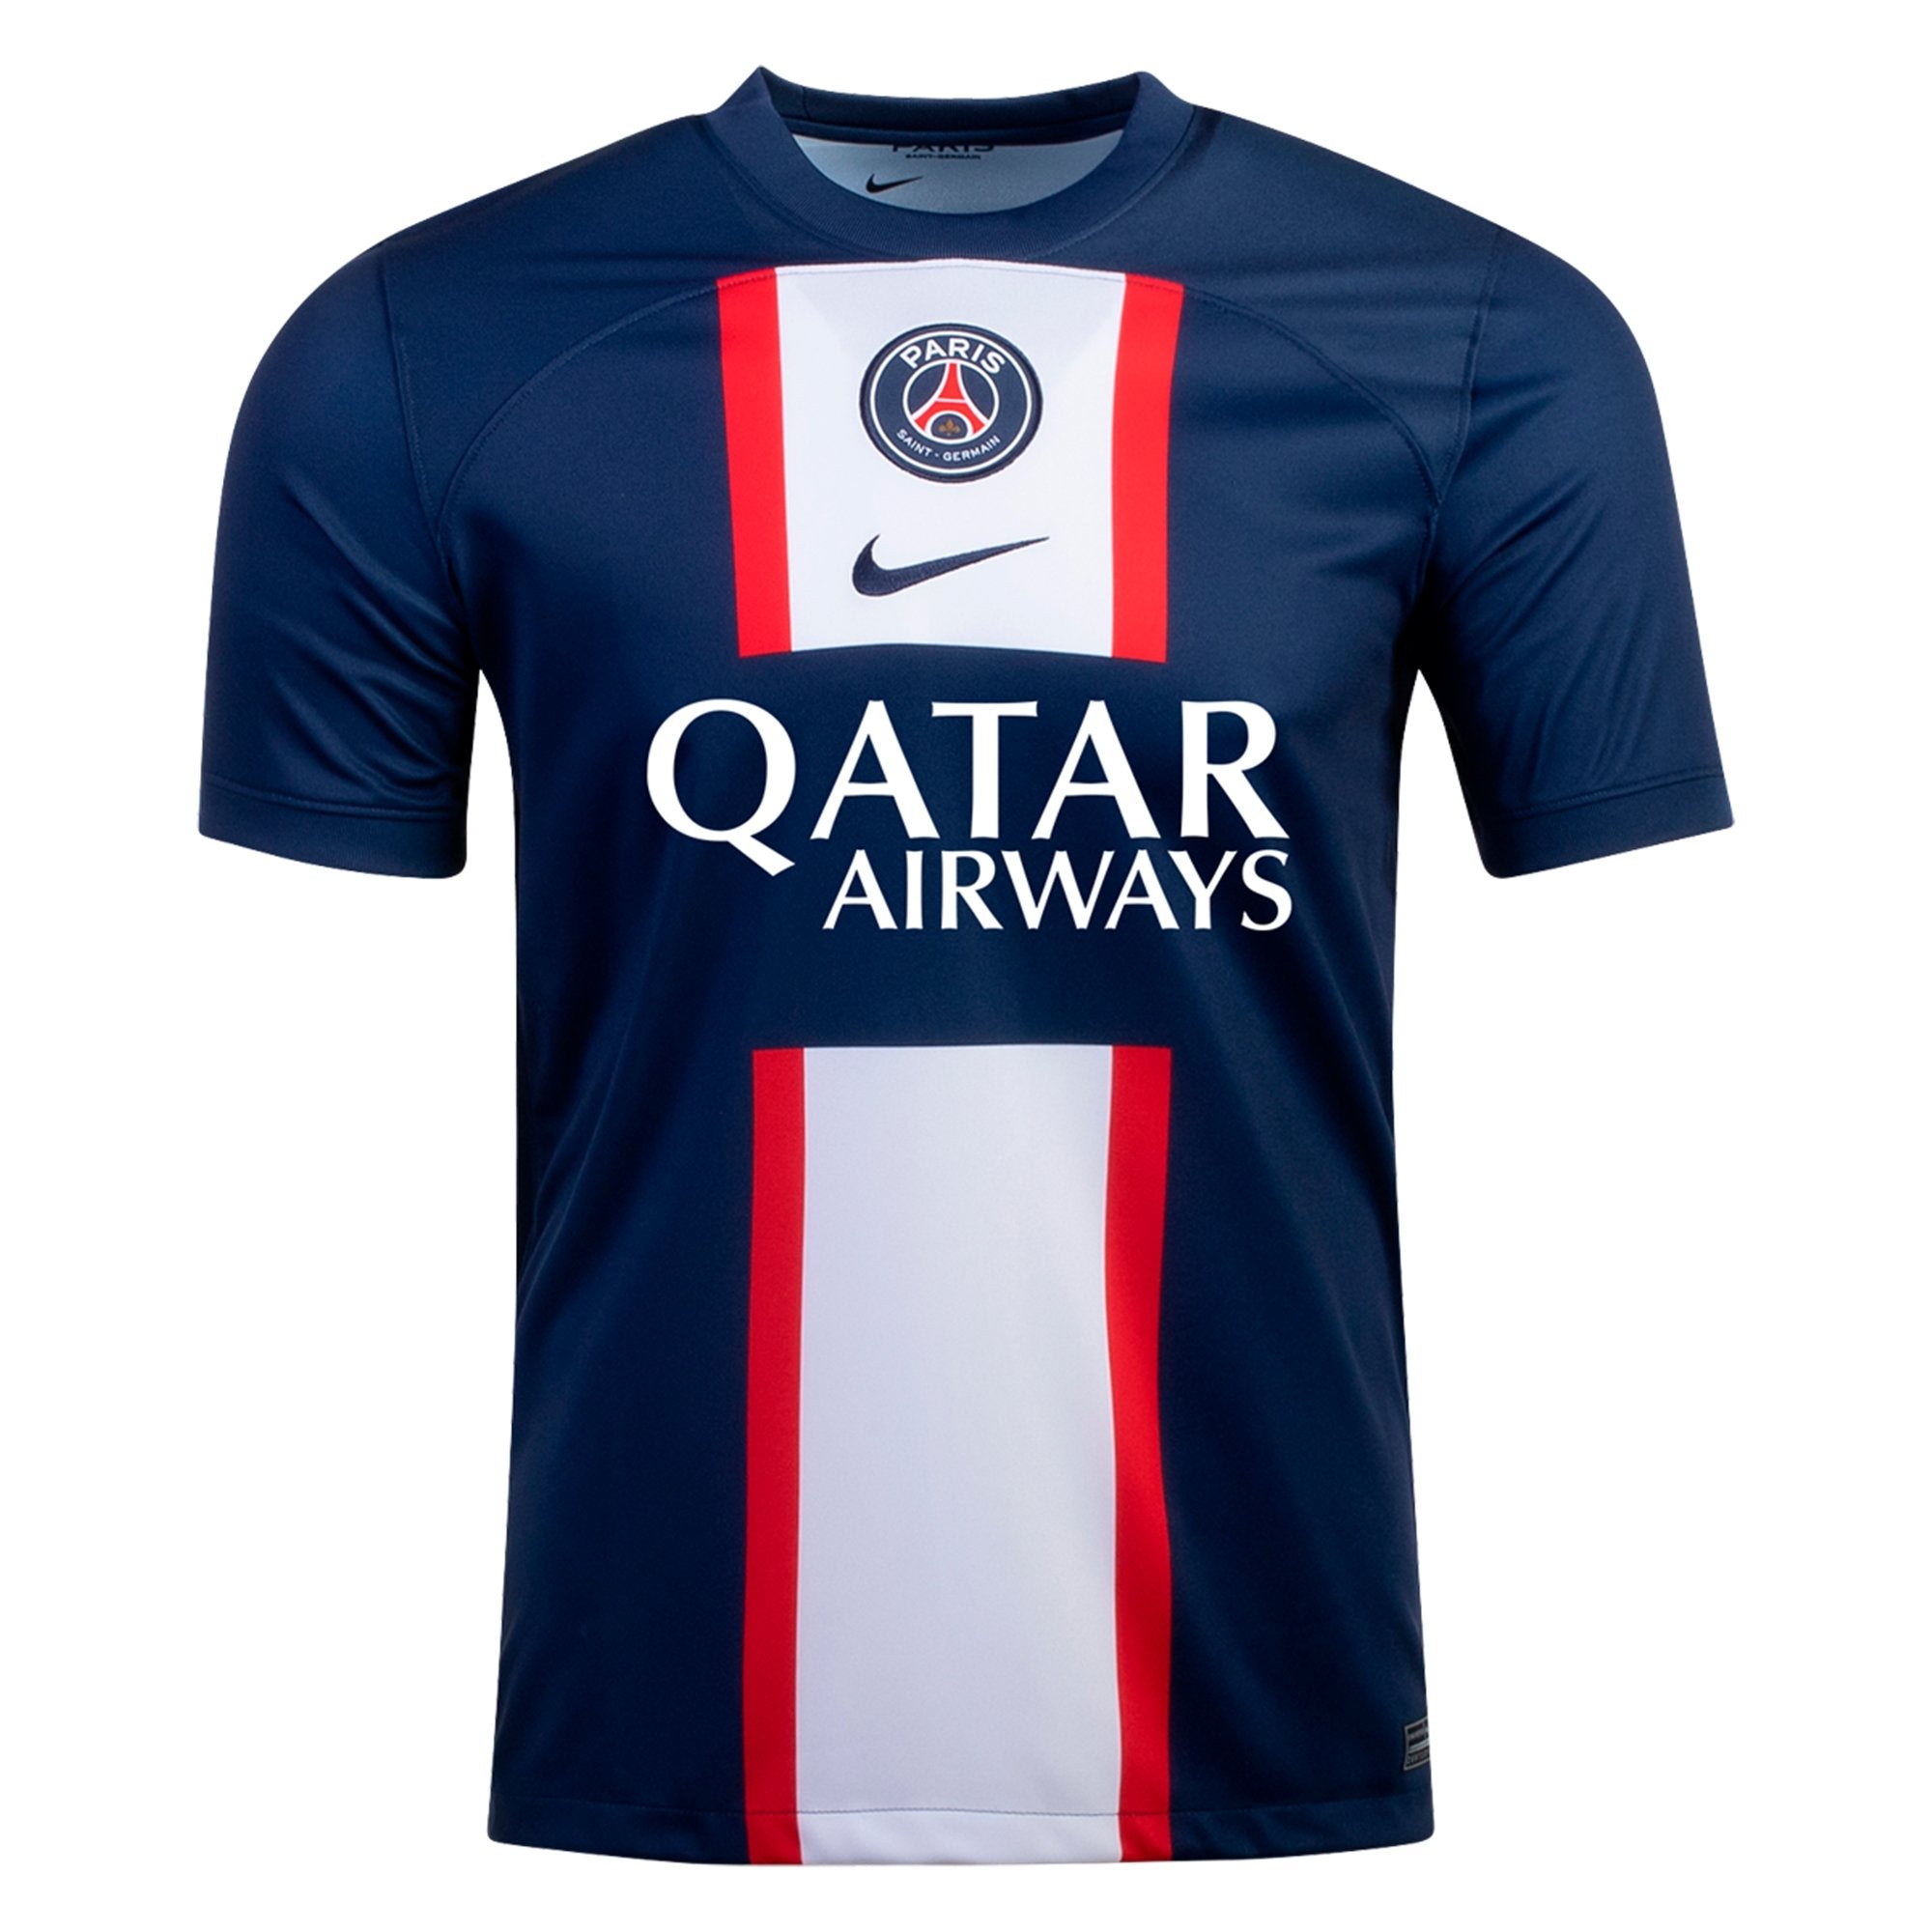 RESTOCKED, DM for price! Rare 06/07 PSG away jersey! Size M-XL available,  limited quantity!